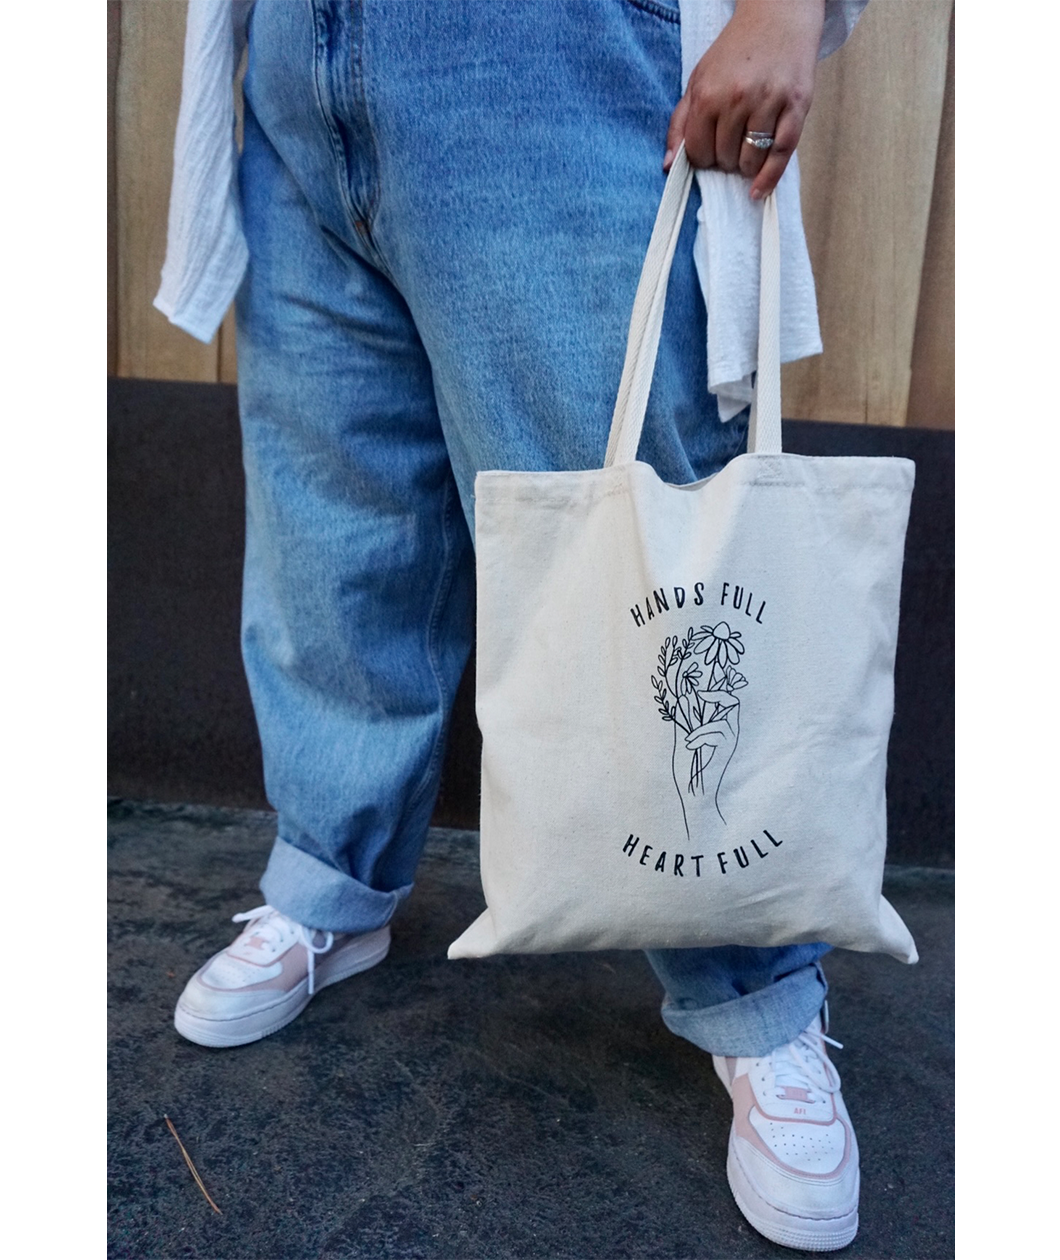 Close up of someone holding the canvas tote from Sierra Schultzzie with the words "Hands Full, Heart Full" printed in black as well as an outline of a hand holding flowers.